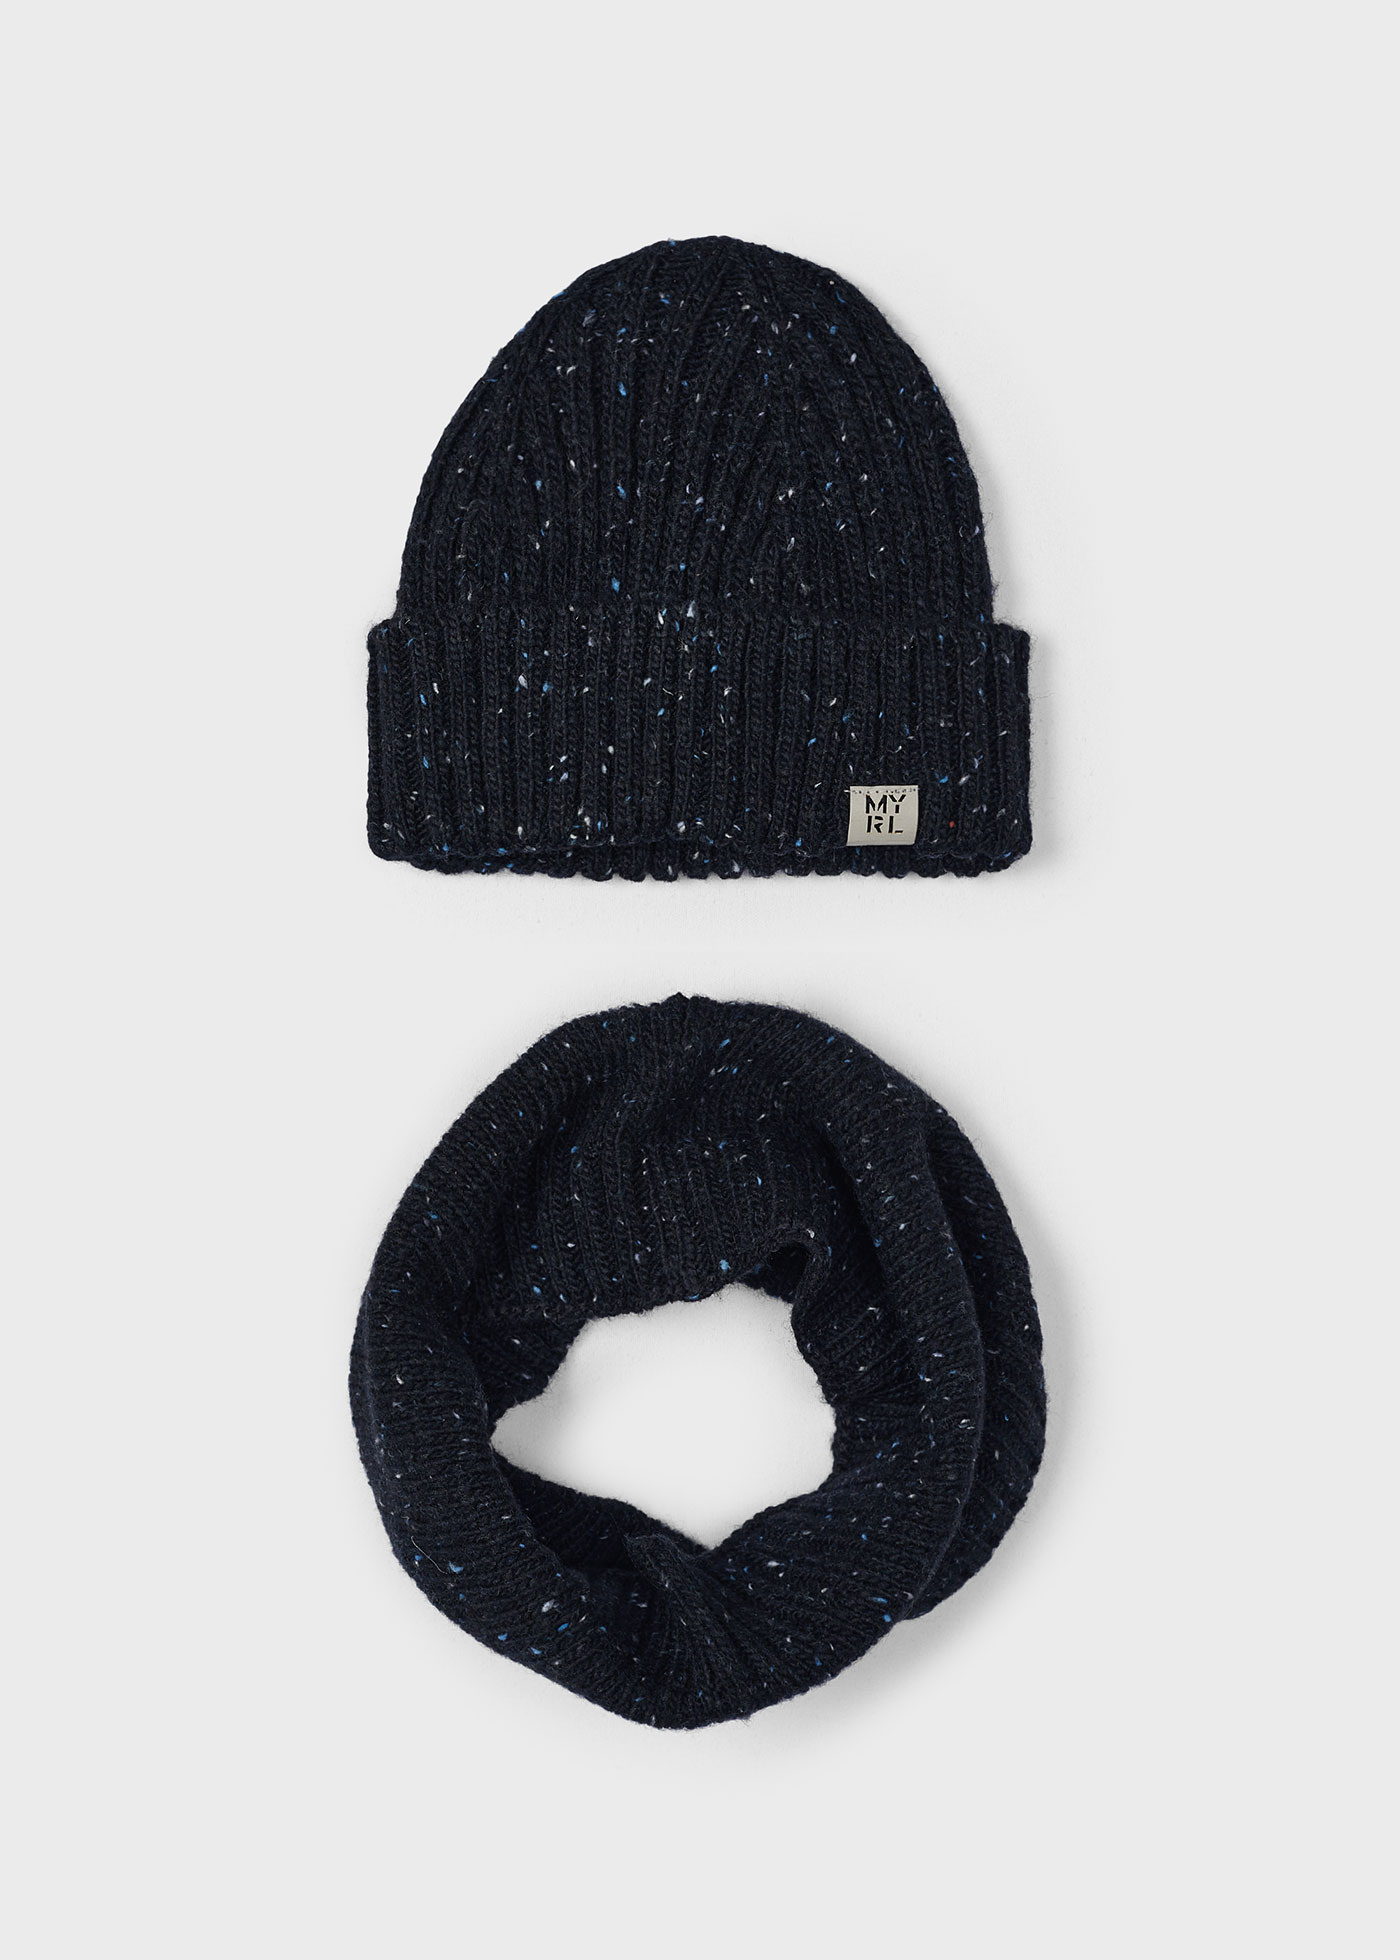 Hat and beanie set for boys